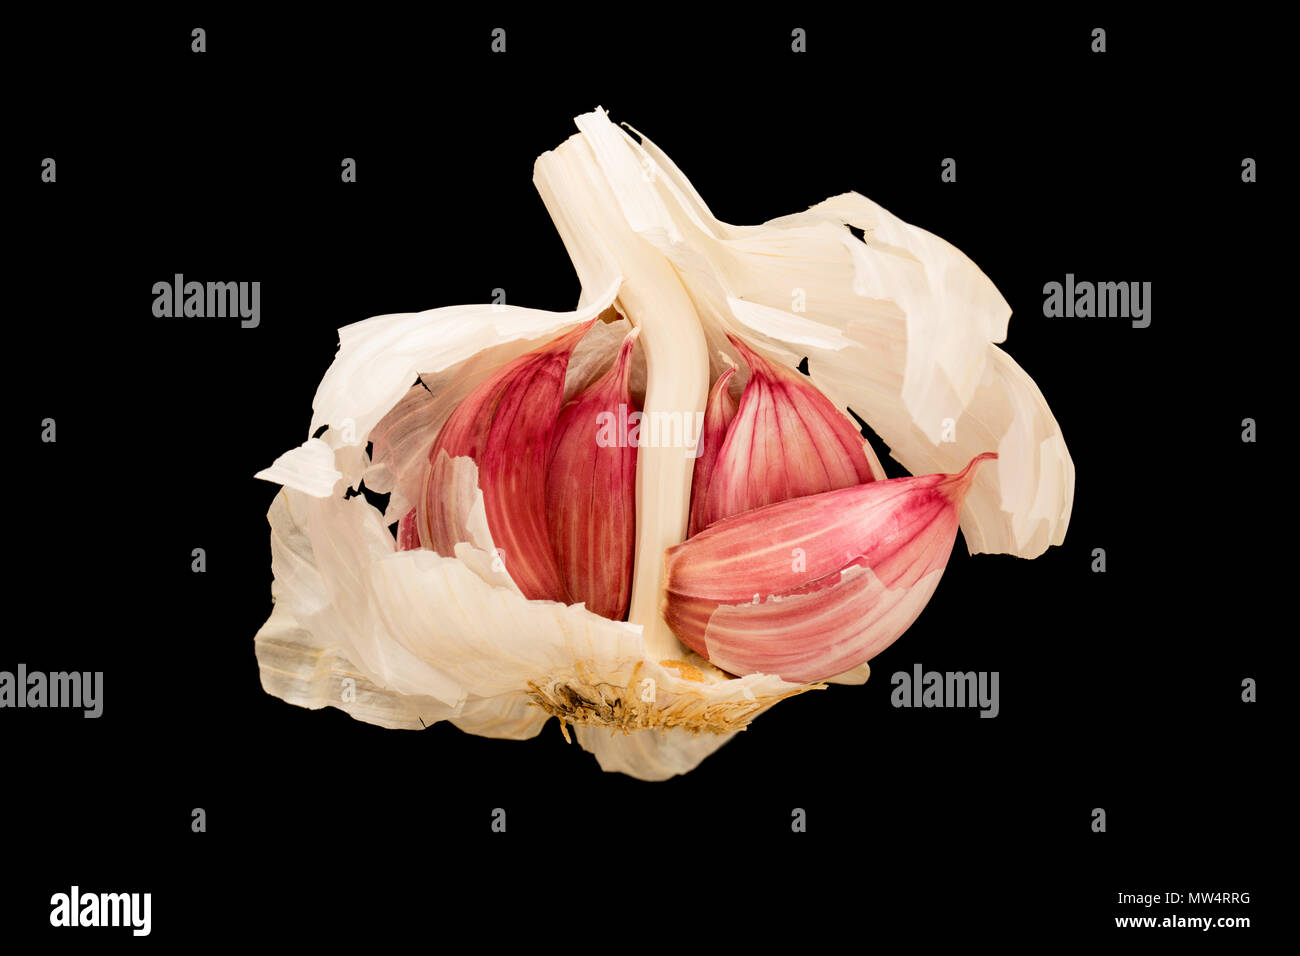 Garlic bulb and cloves bought from a supermarket in England UK GB on a black background Stock Photo